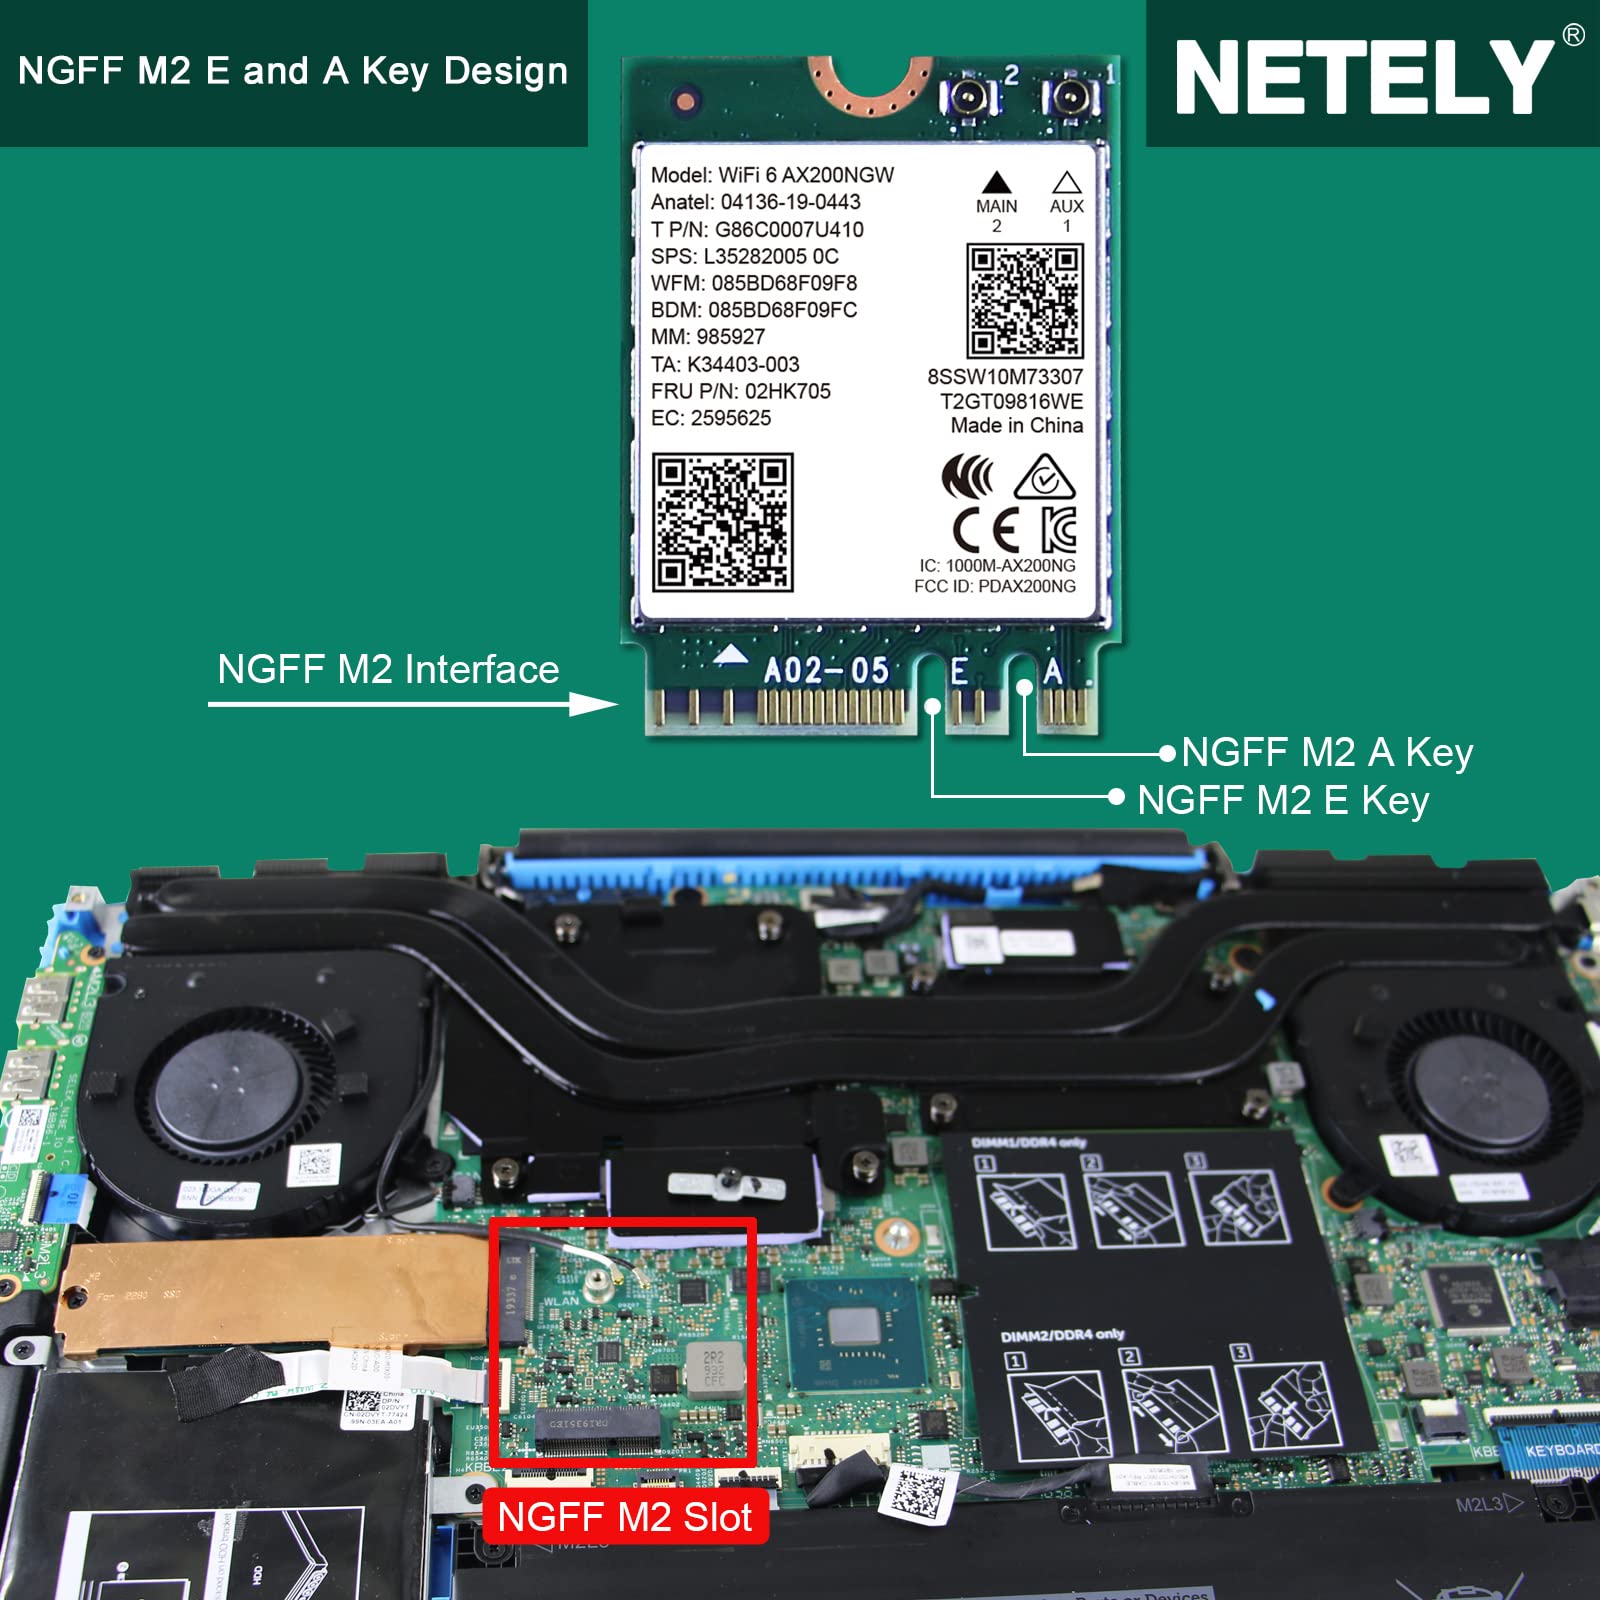 NETELY 802.11AX WiFi 6 AX200NGW MGFF M2 Interface WiFi Adapter with Bluetooth 5.0, WiFi 6 3000Mbps Speed, BT 5.0, 2.4GHz 574Mbps & 5GHz 2400Mbps, Intel WiFi 6 AX200NGW WiFi Card (WiFi 6 AX200NGW)